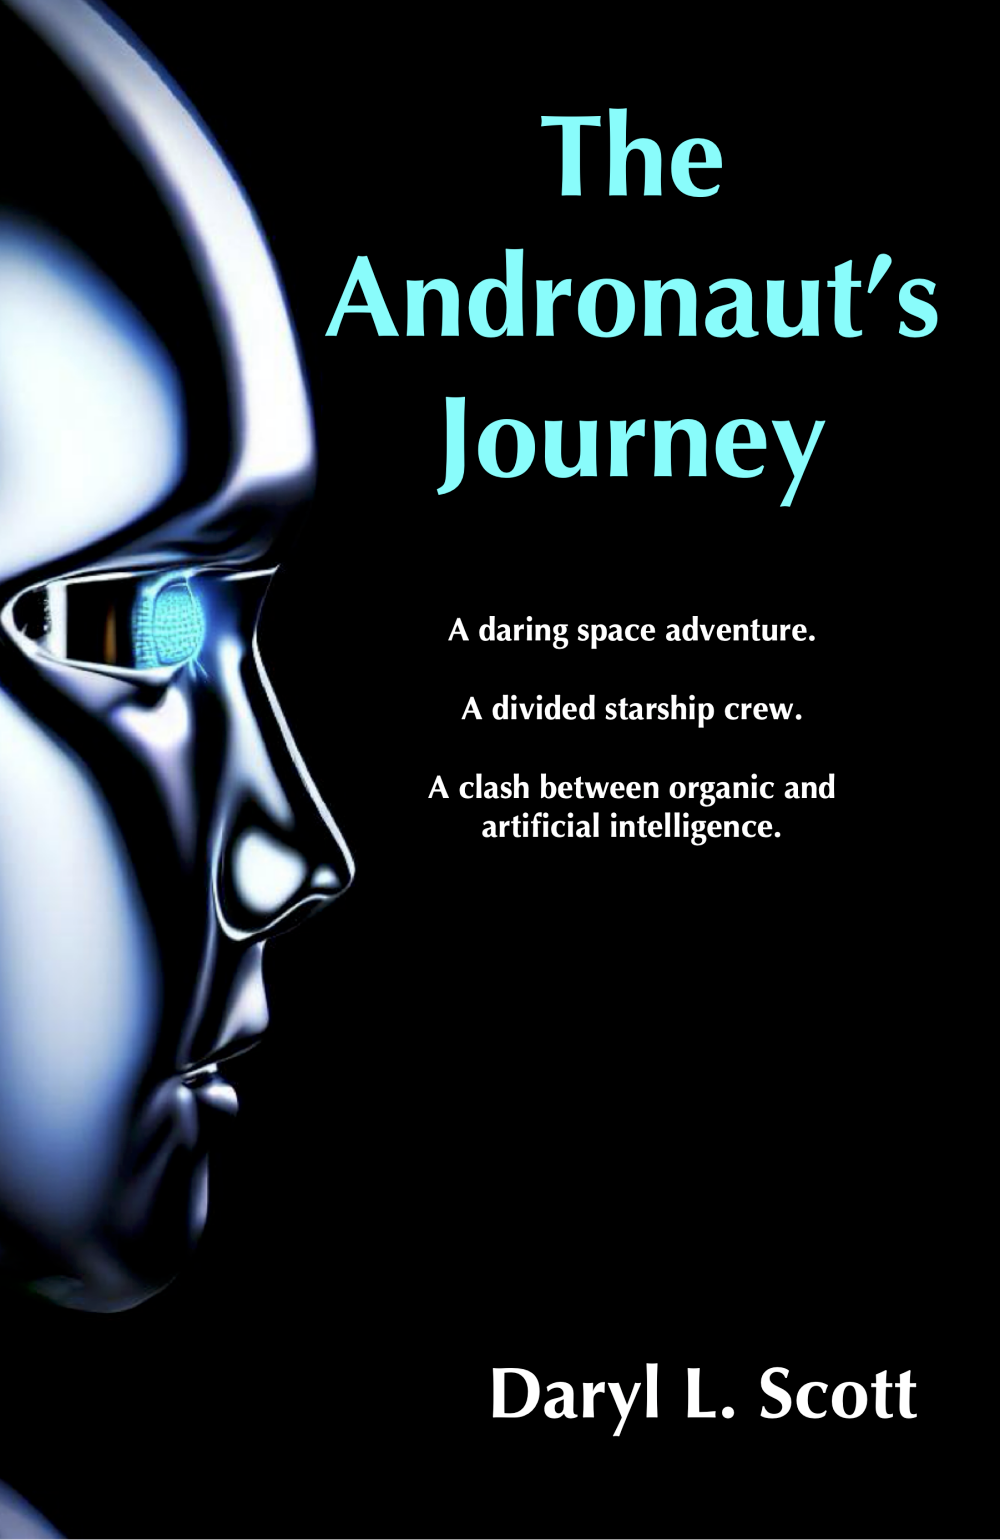 The Andronaut's Journey book cover